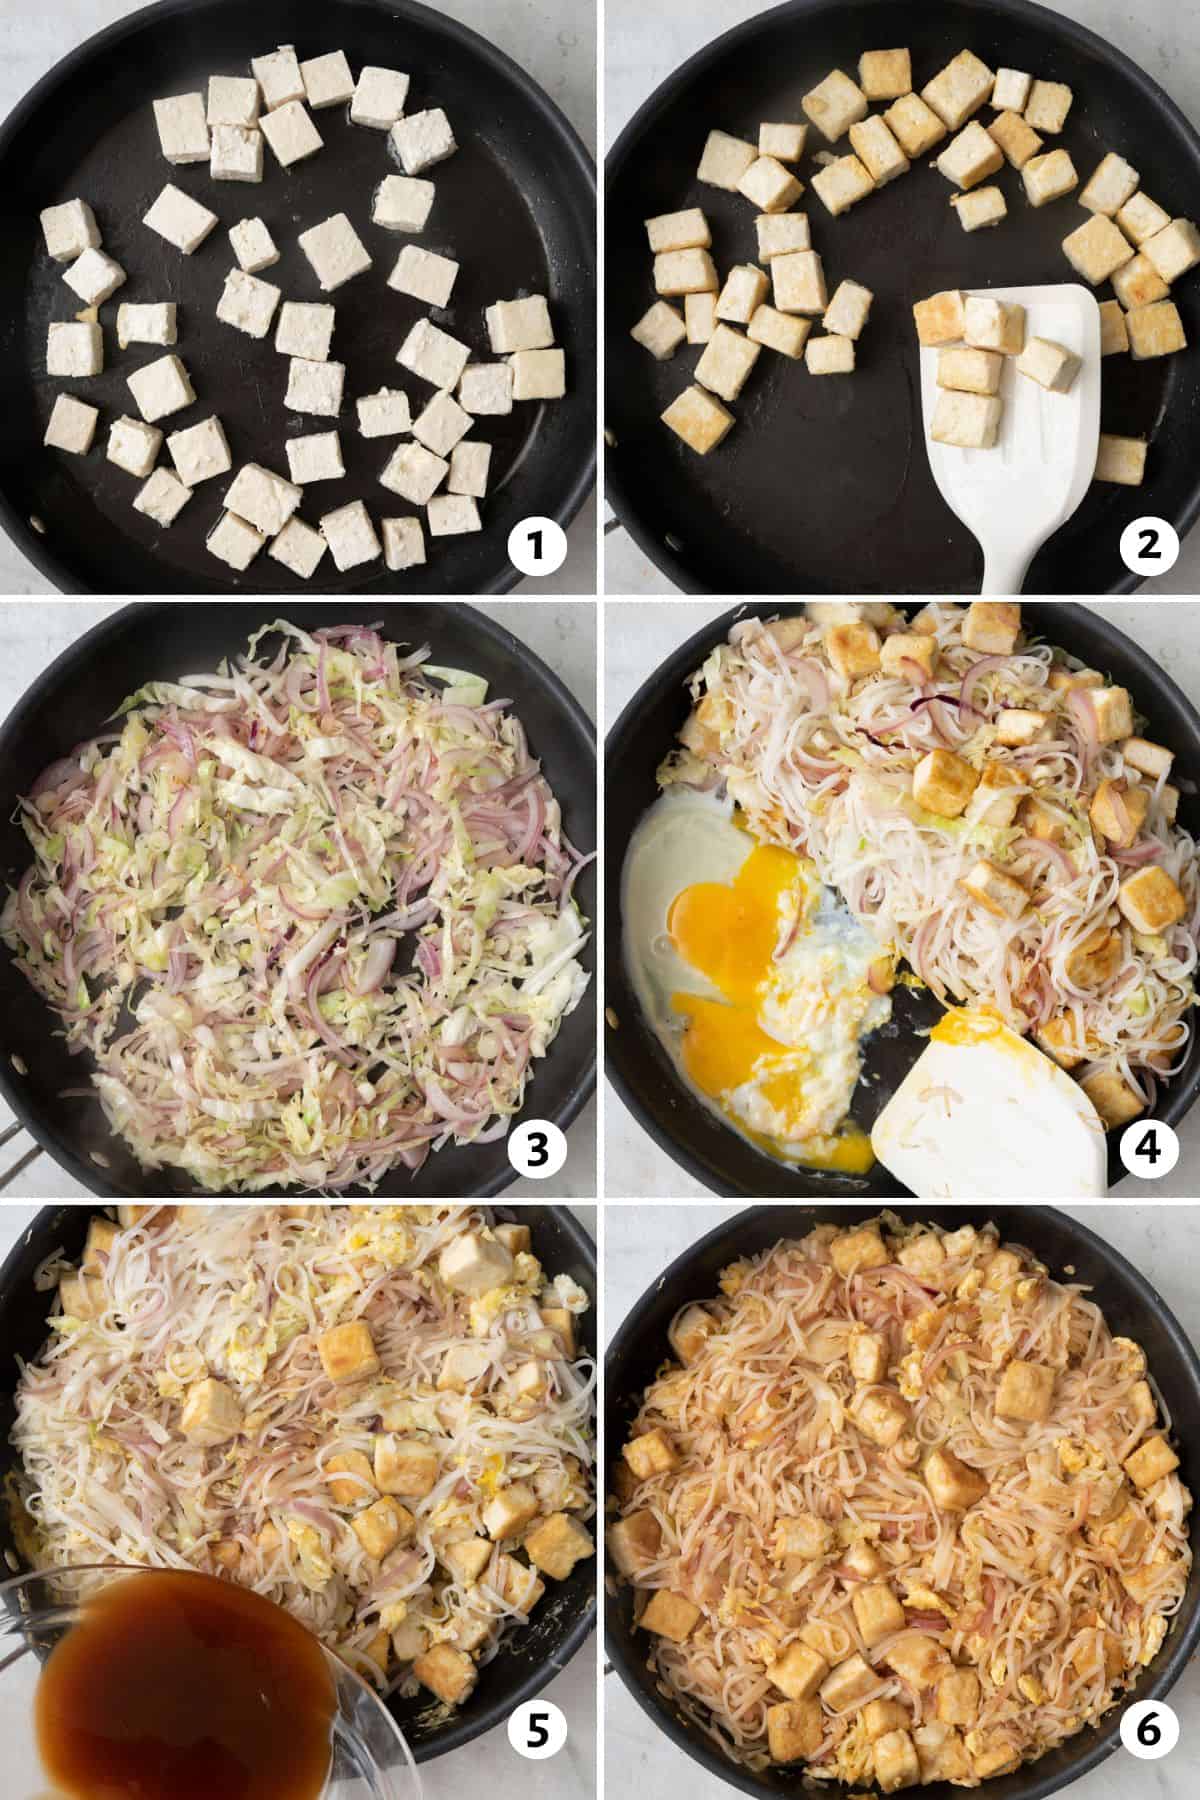 6 image collage making recipe: 1- tofu cubes in a pan, 2- tofu after browning, 3- veggies being sauteed in a pan, 4- tofu cubes added and pad thai pushed to the side with eggs being fried, 5- sauce being added to pan, 6- final pad thai.